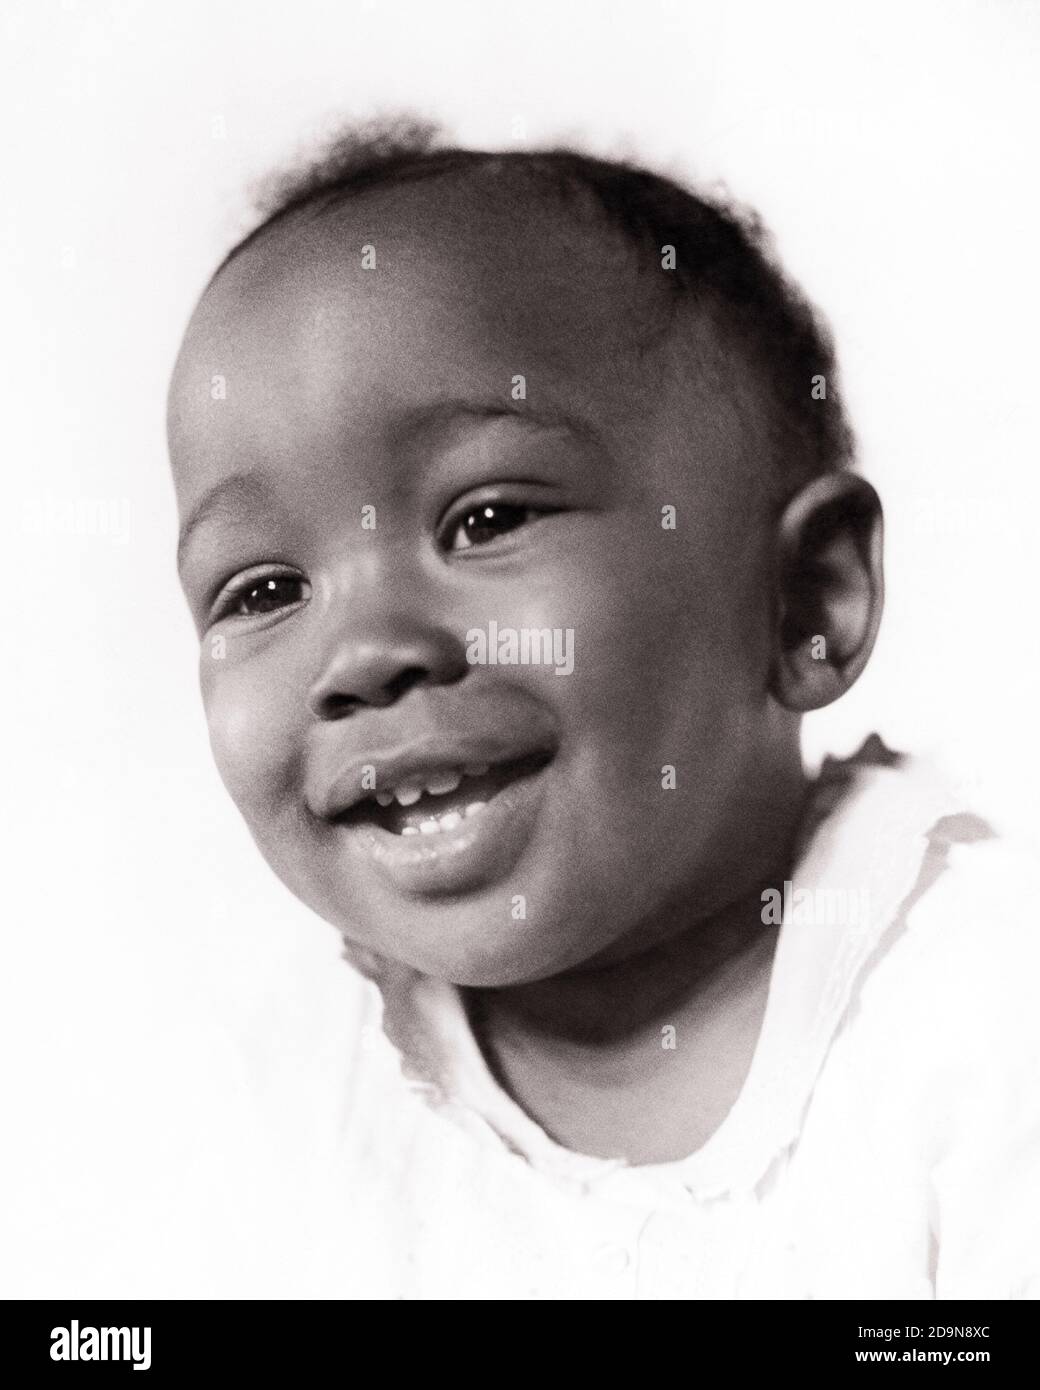 1940s PORTRAIT SMILING AFRICAN-AMERICAN BABY BOY - n221 HAR001 HARS BLACK ETHNICITY SMILES JOYFUL BABY BOY PLEASANT AGREEABLE CHARMING GROWTH JUVENILES LOVABLE PLEASING ADORABLE APPEALING BLACK AND WHITE HAR001 OLD FASHIONED AFRICAN AMERICANS Stock Photo